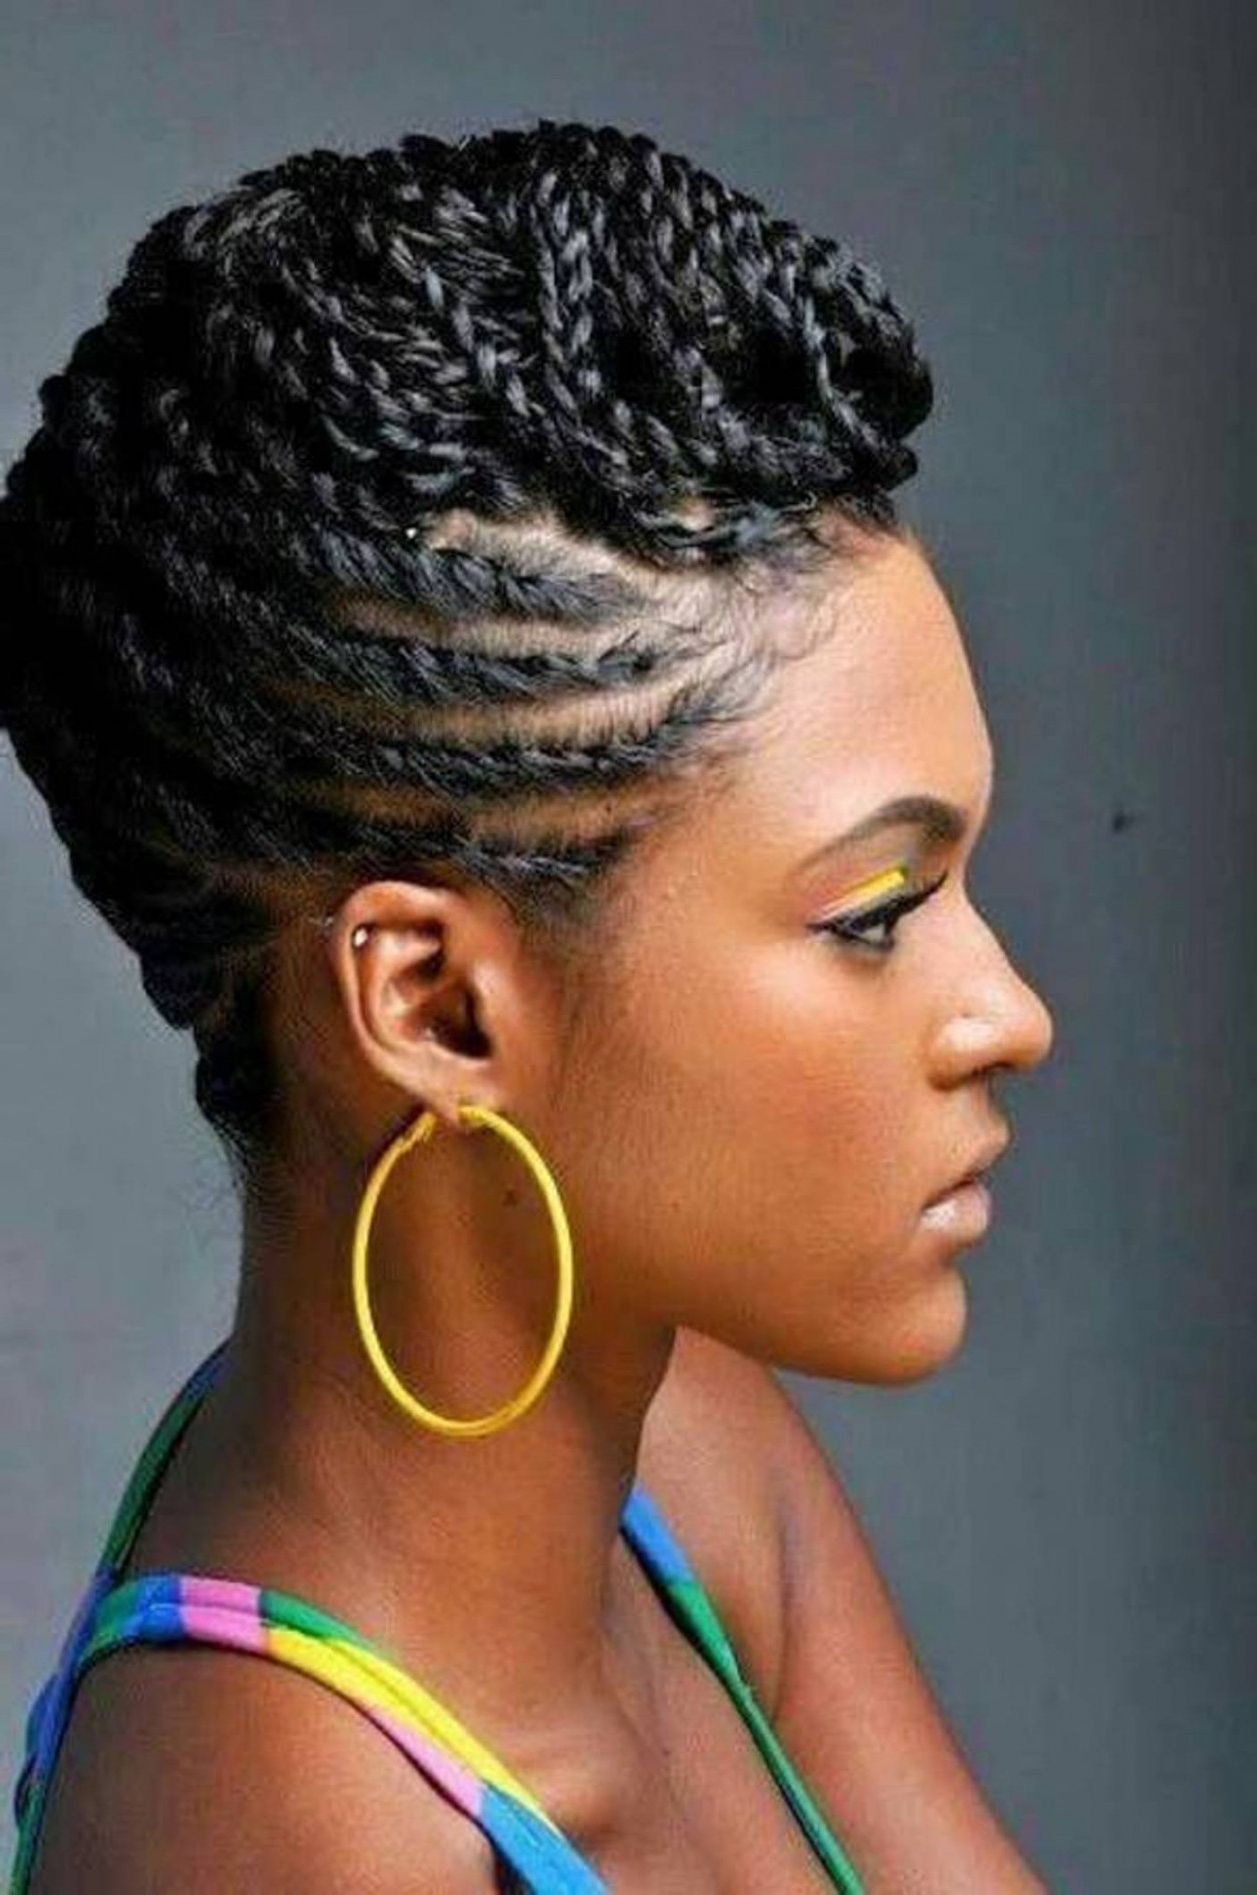 Black Updo Hairstyles Updo Hairstyles For Black Women Part | Latest With Regard To Black Updo Hairstyles (View 2 of 15)